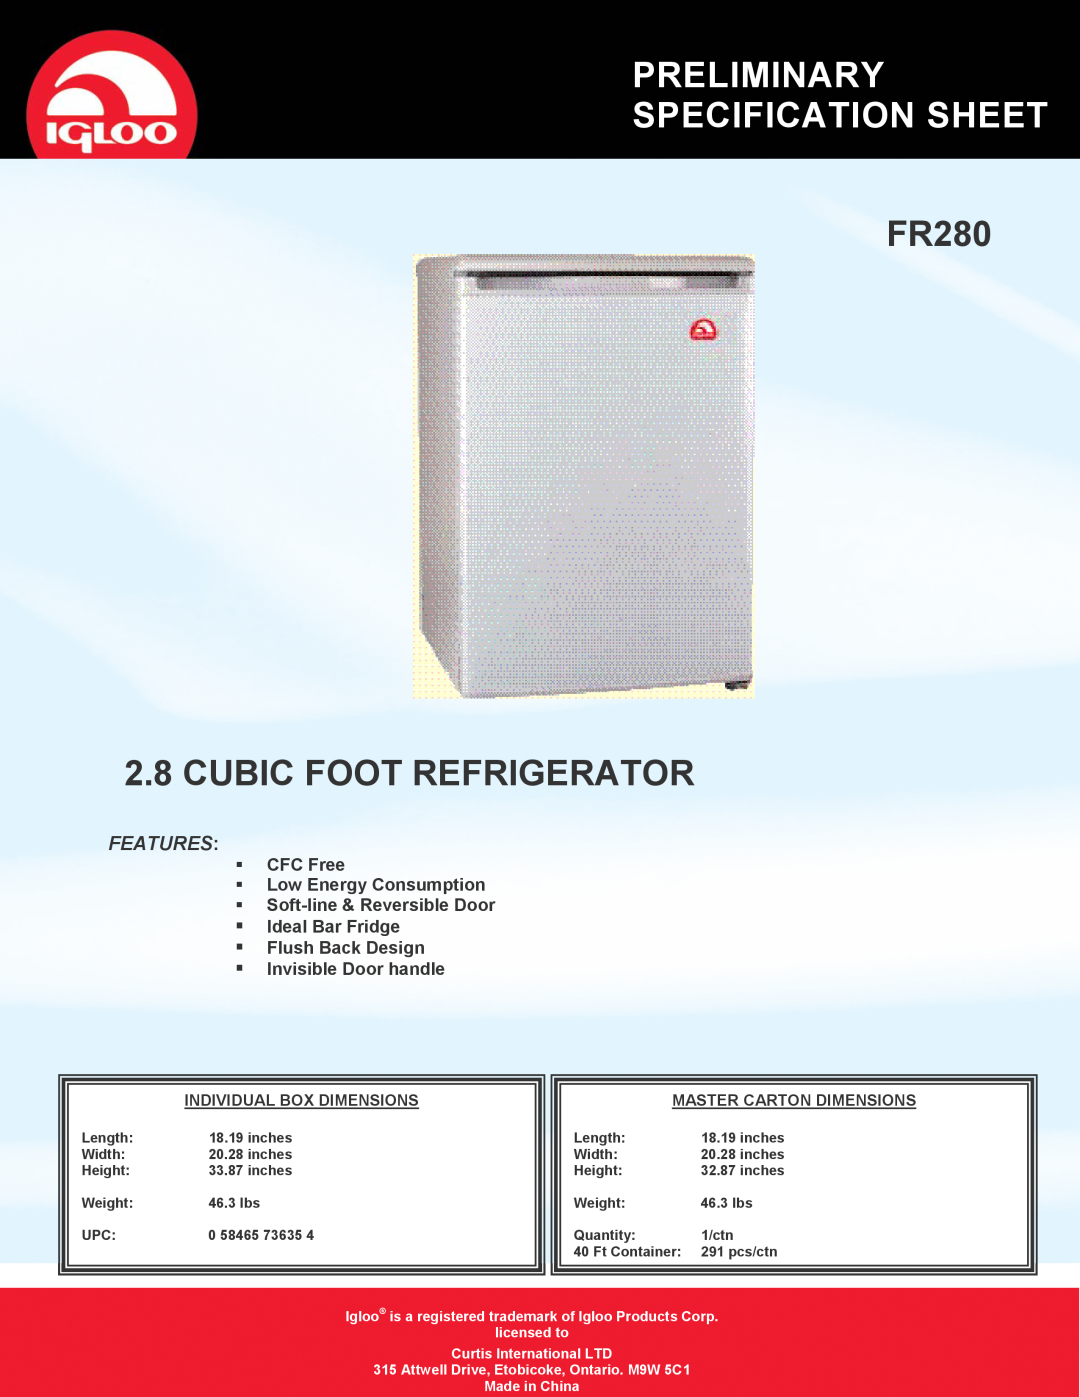 Igloo specifications Preliminary Specification Sheet, FR280 2.8 CUBIC FOOT REFRIGERATOR, Features, Made in China 